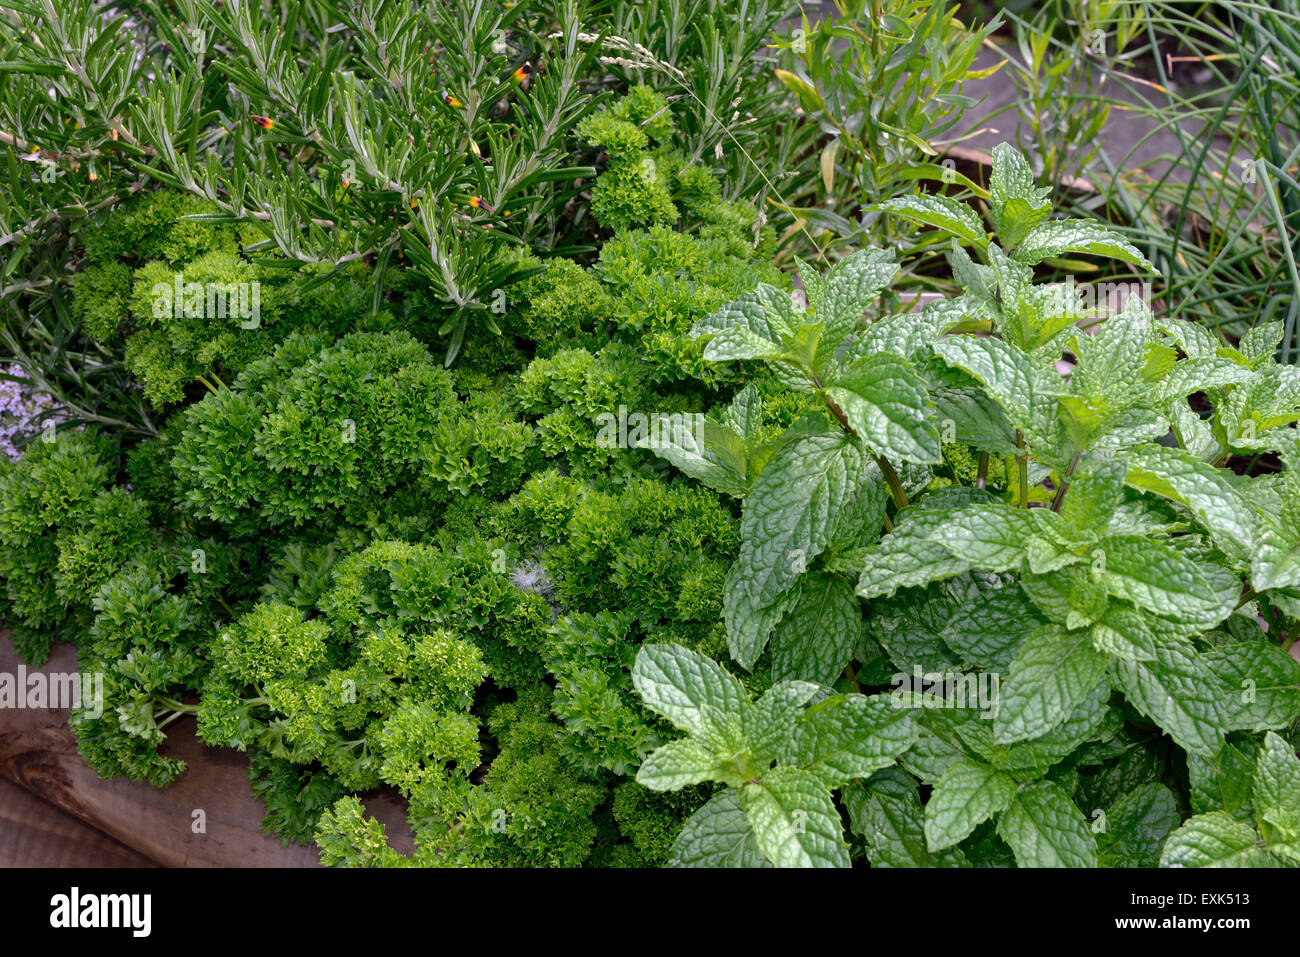 Raised bed for culinary herbs, mint, curly leaf parsley, and rosemary for use in the kitchen Stock Photo